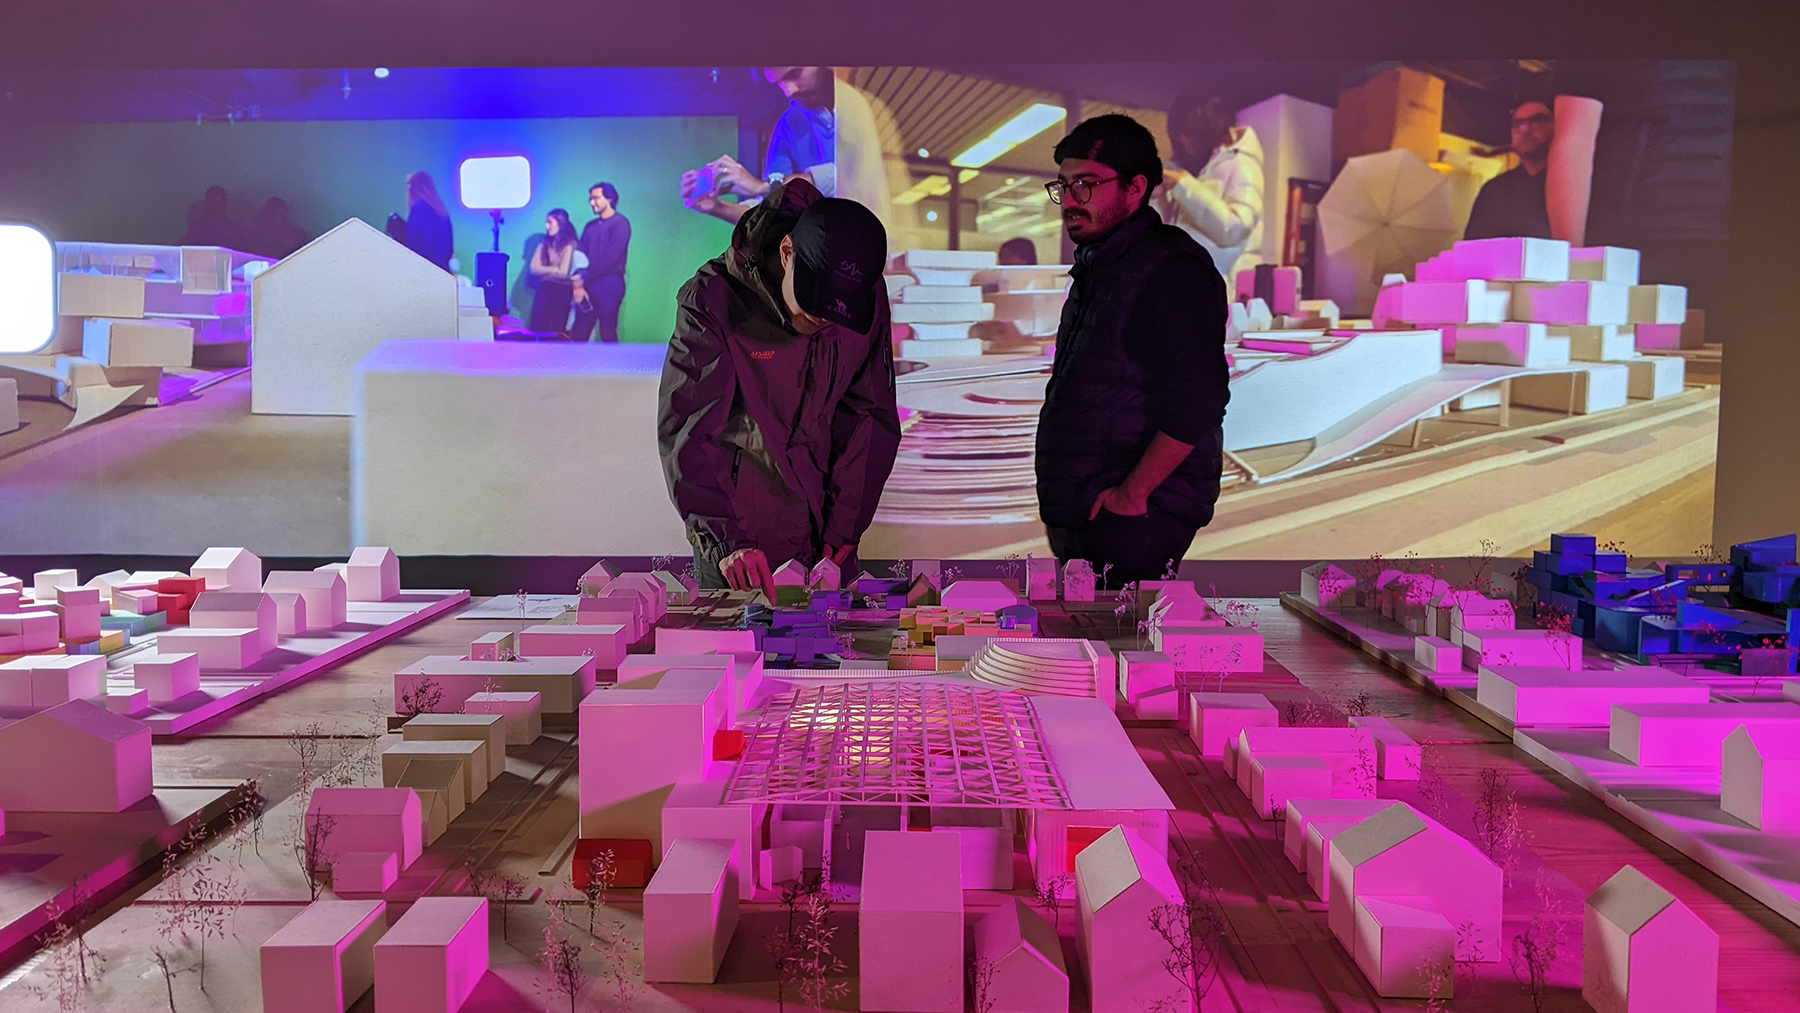 Two people look at a small model neighborhood on display in the TVLab. A digital display is lit up behind them.